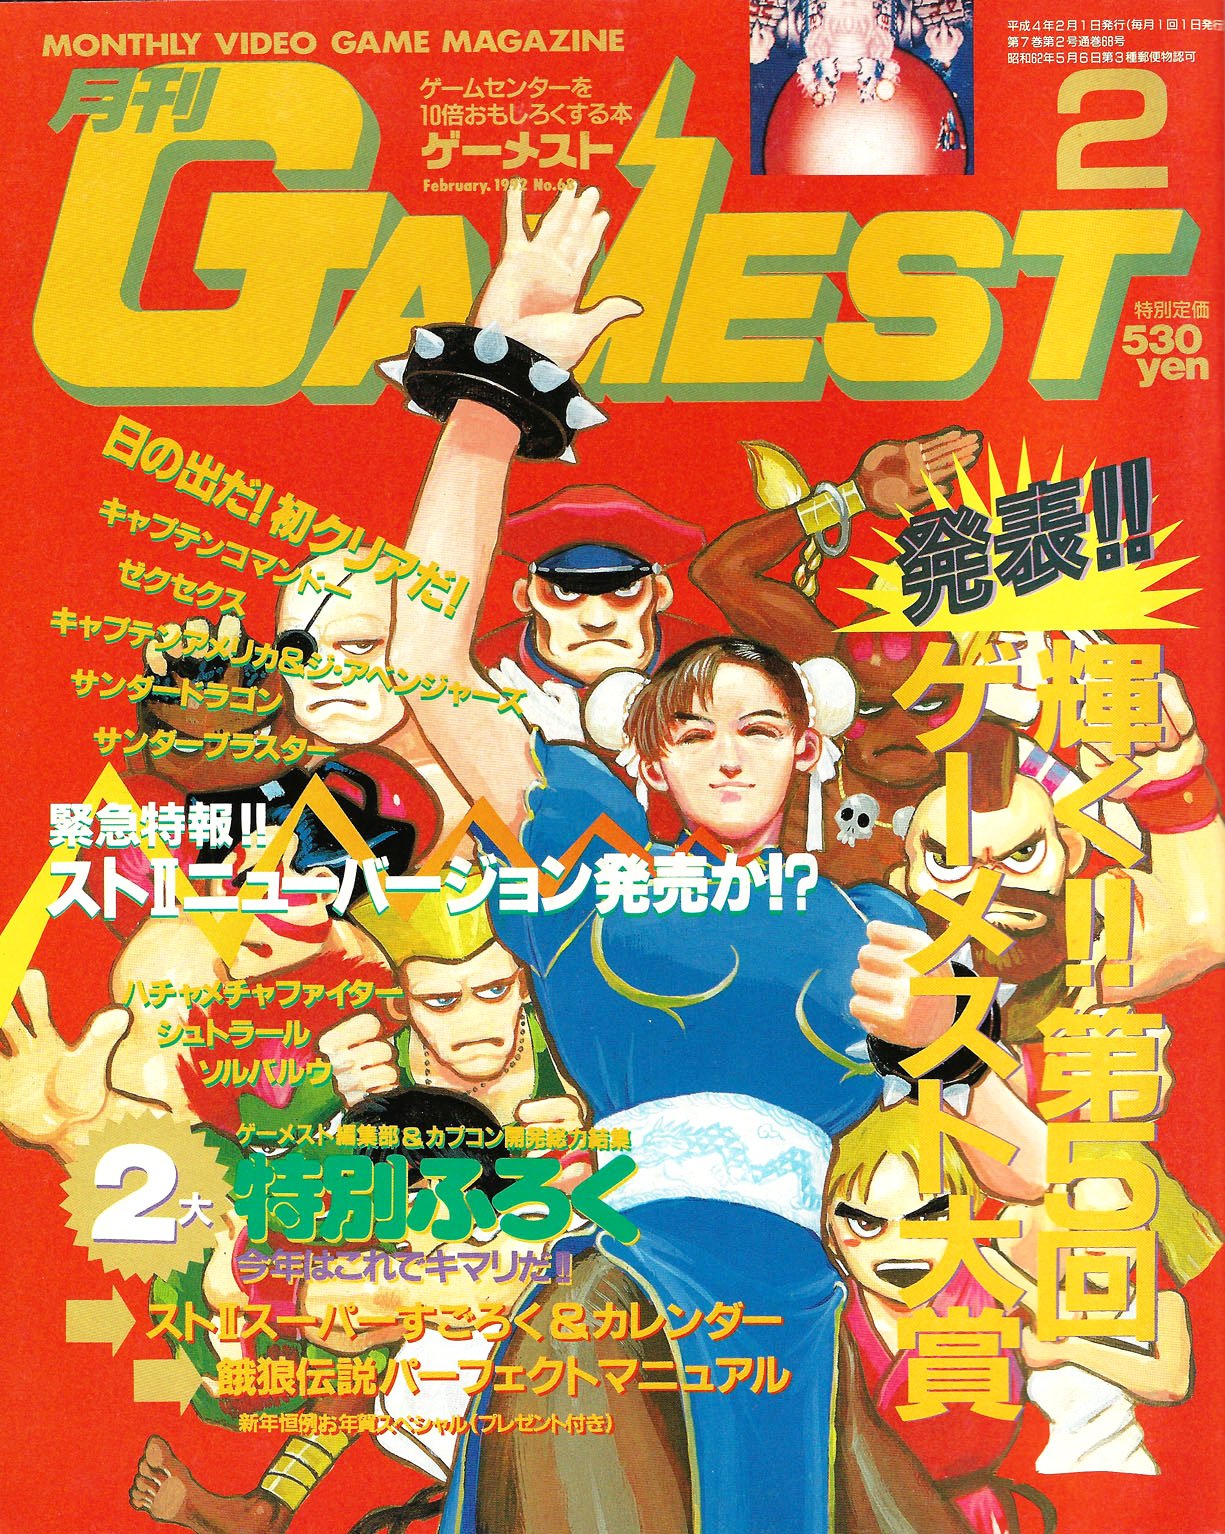 Gamest - Video Game Magazines - Page 3 - Retromags Community